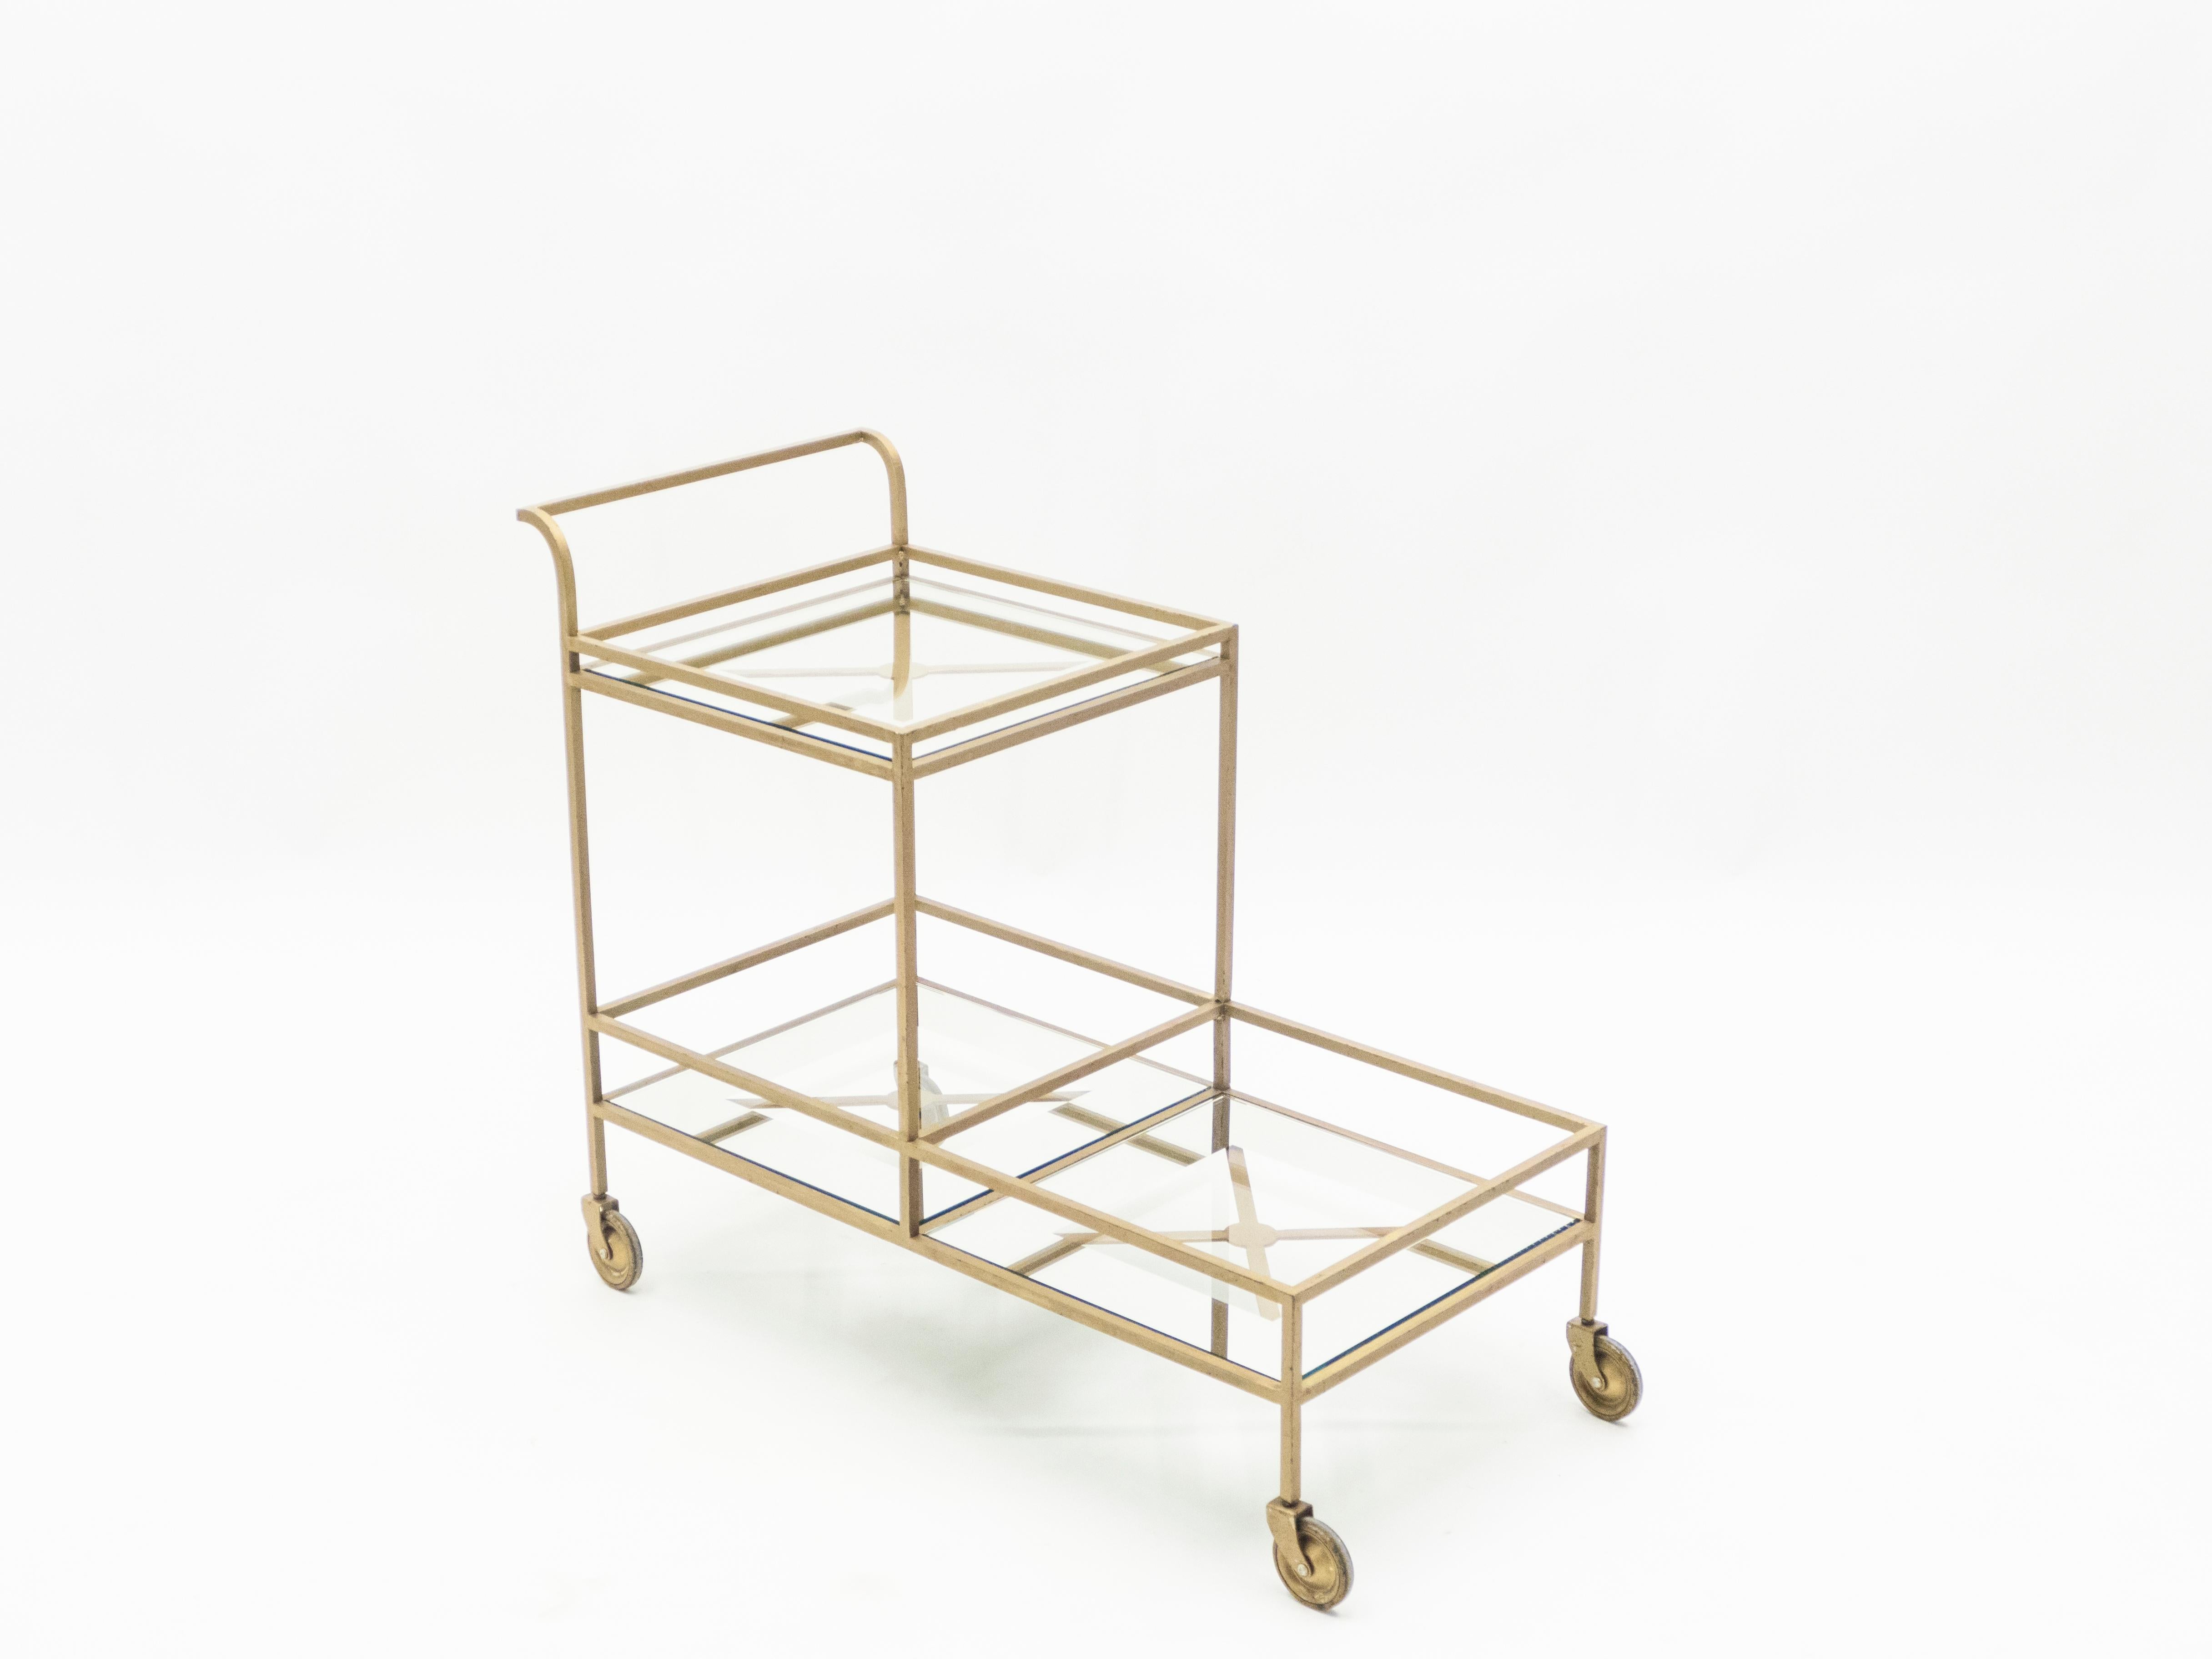 Rare and iconic serving trolley by Jean Royère in gilded metal with mirrored glass made circa 1950. Very good vintage condition with beautiful gilded patina.

Having opened a store in Paris in 1943 before the war had ended, Jean Royère was one of